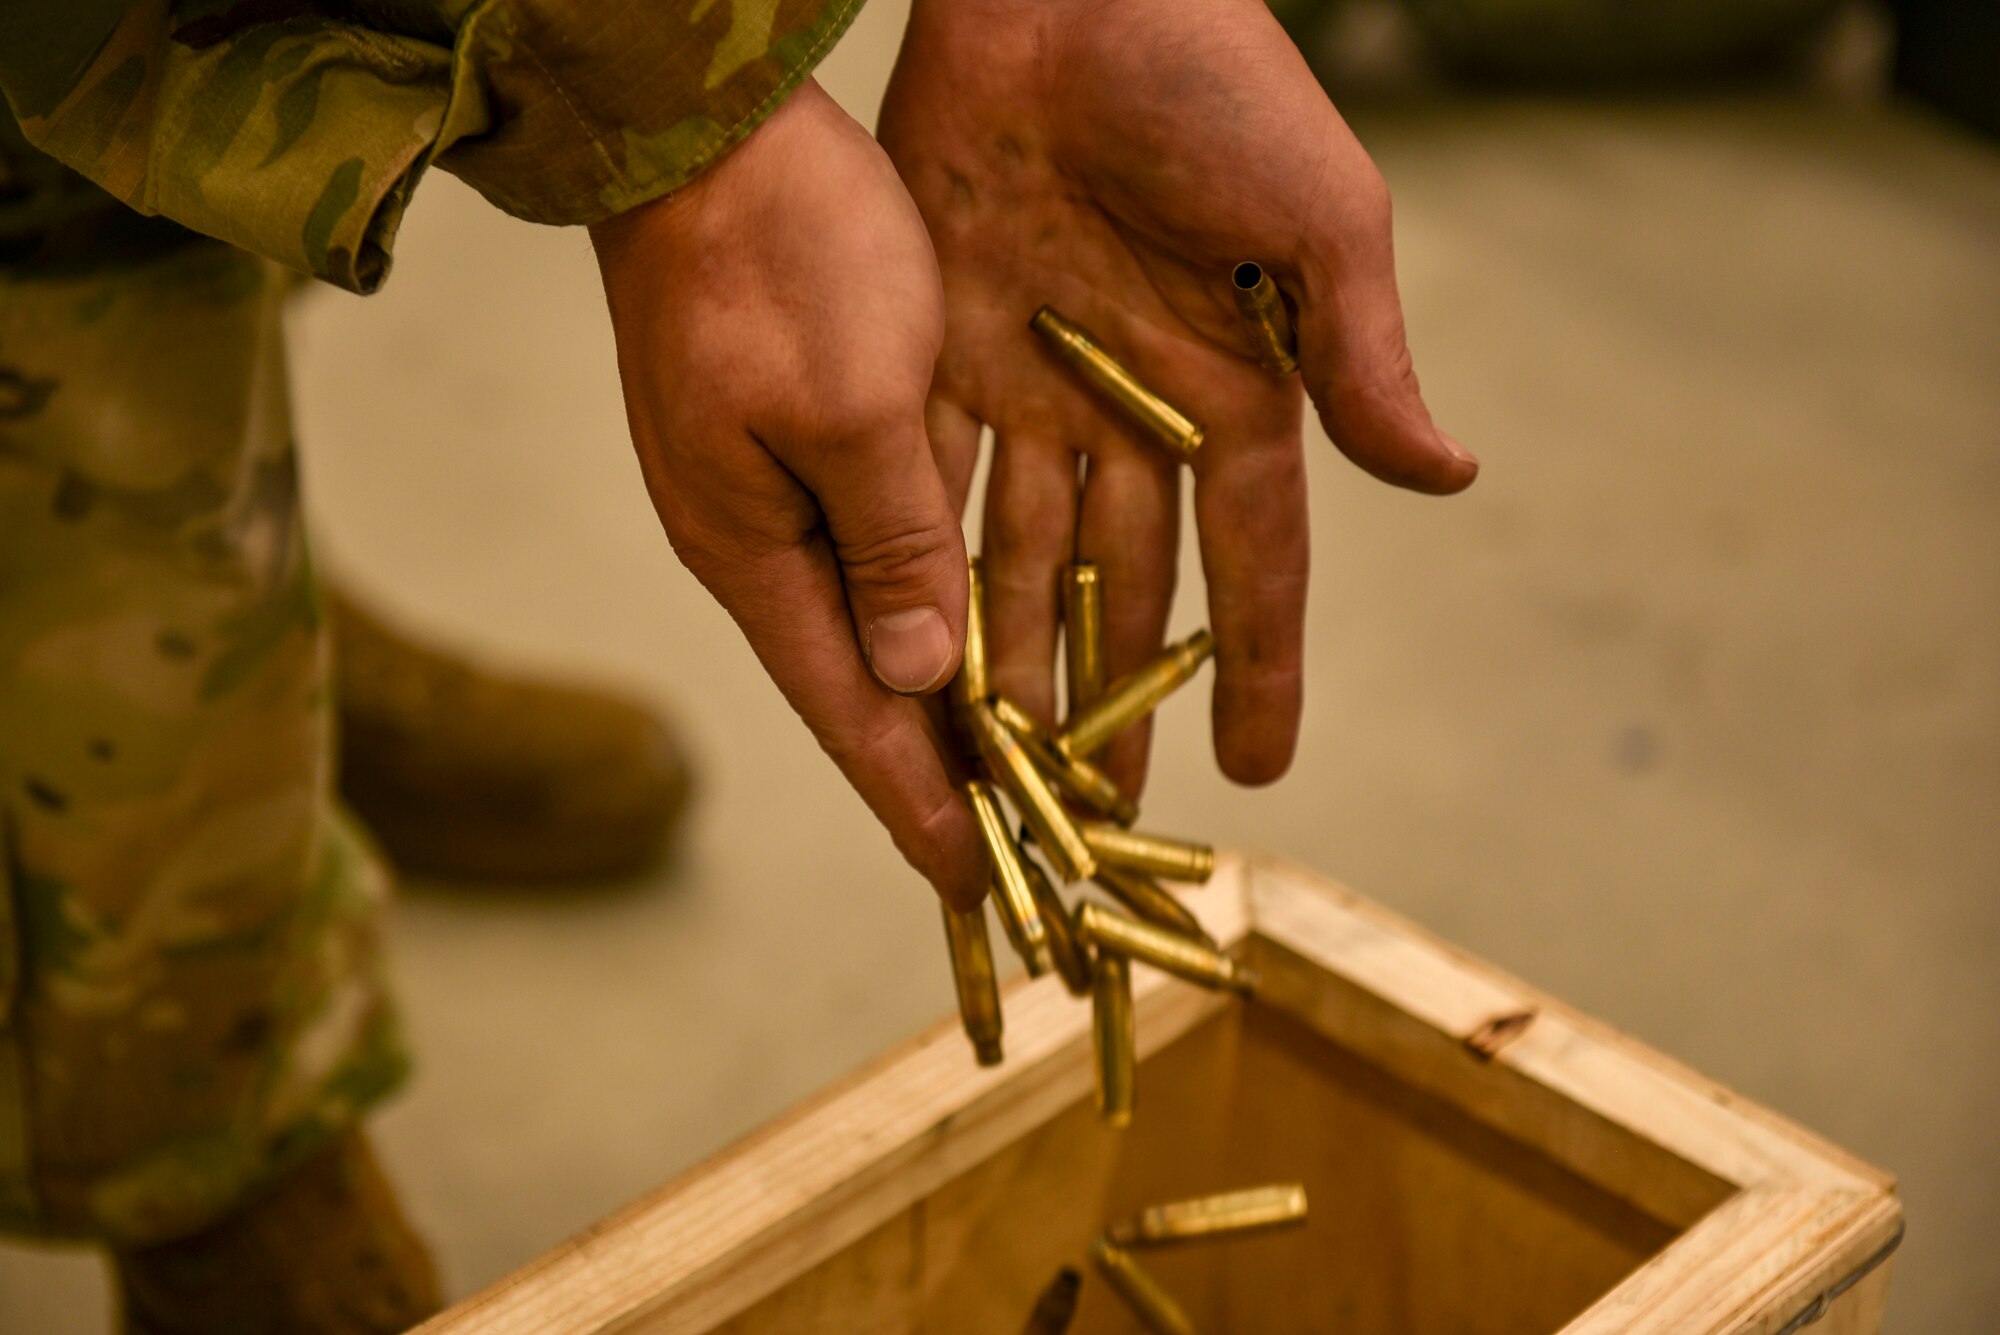 An Airman puts rifle bullet casings into a wooden box.